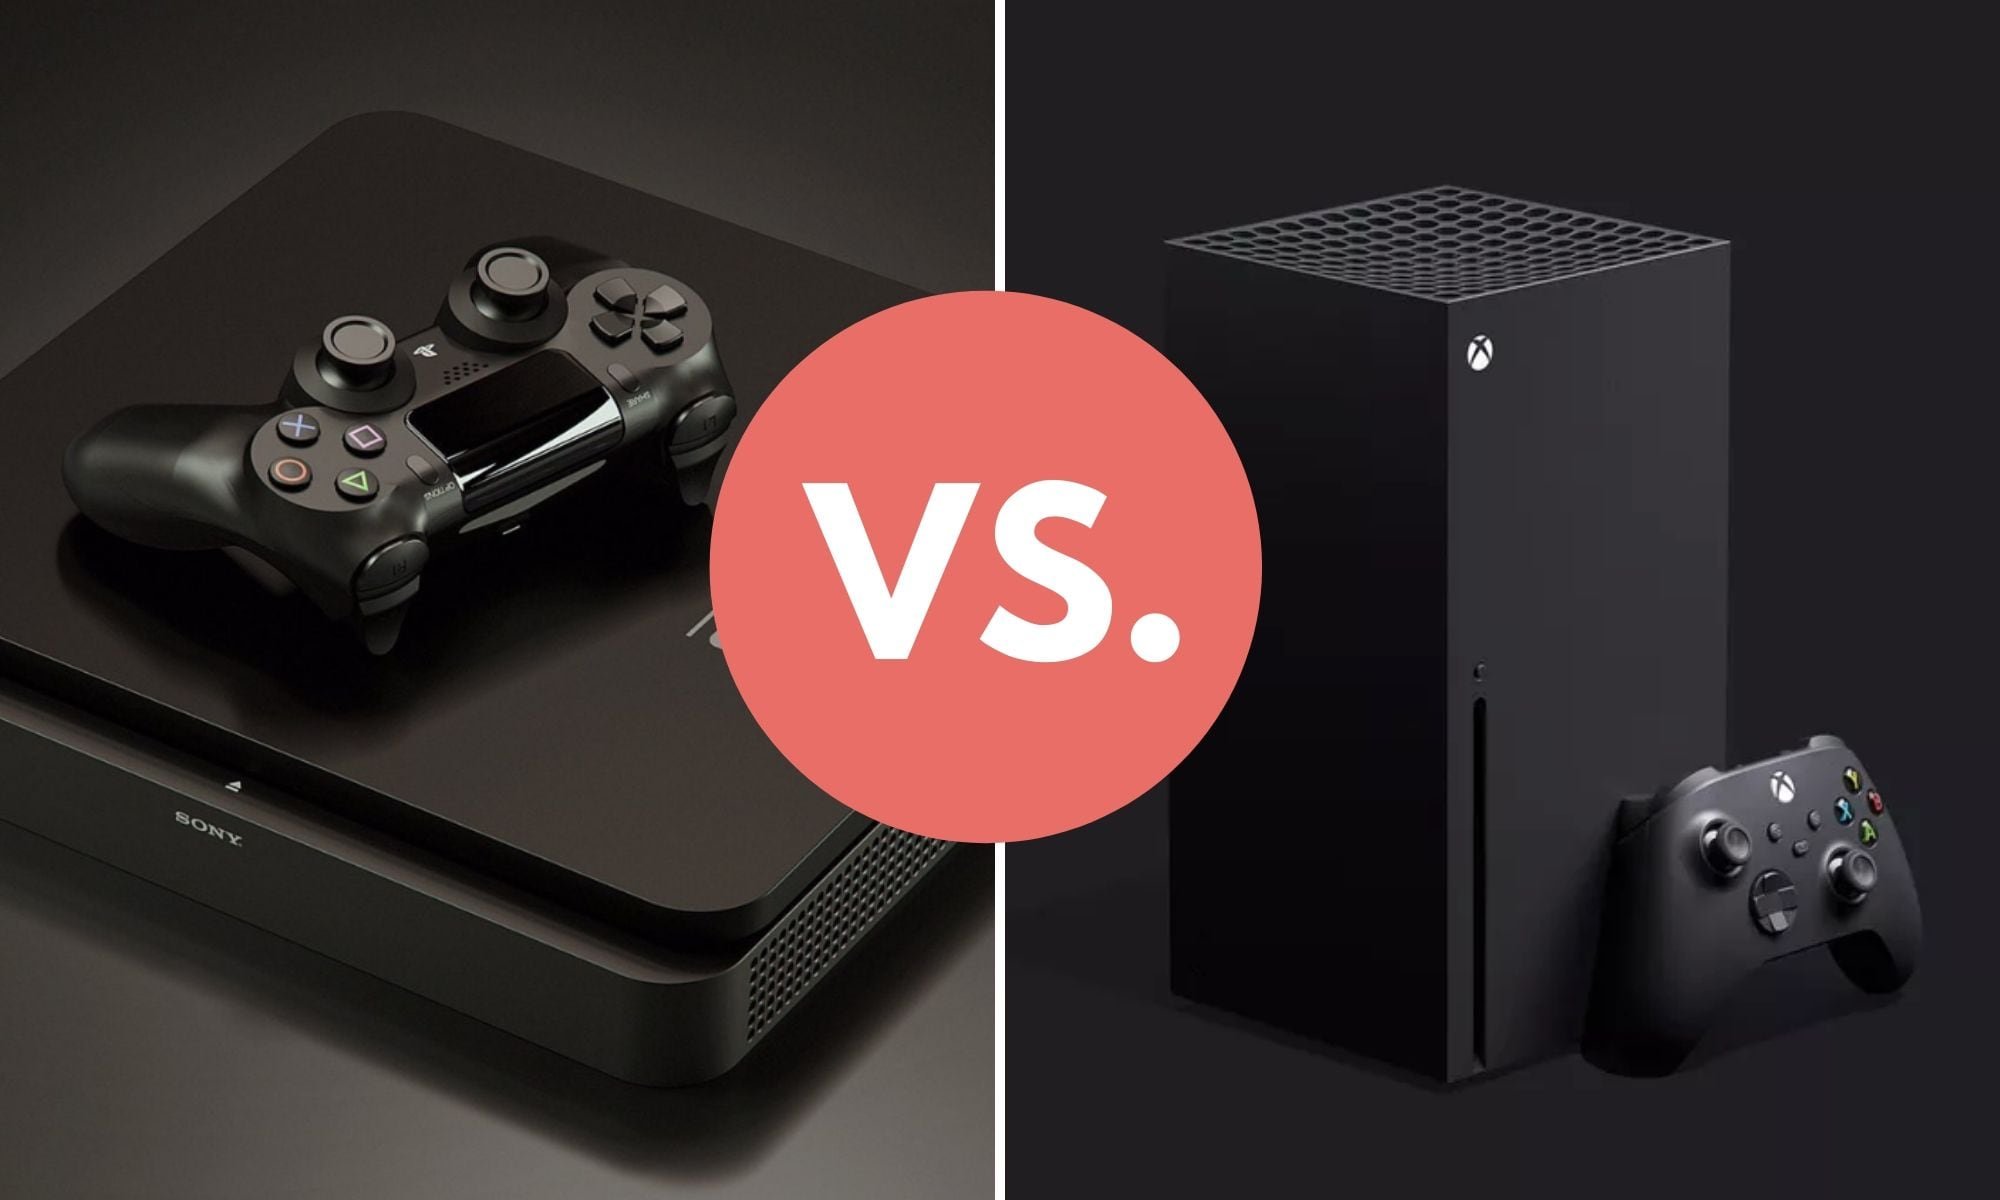 PS5 vs. Xbox Series X: Which one should you buy?